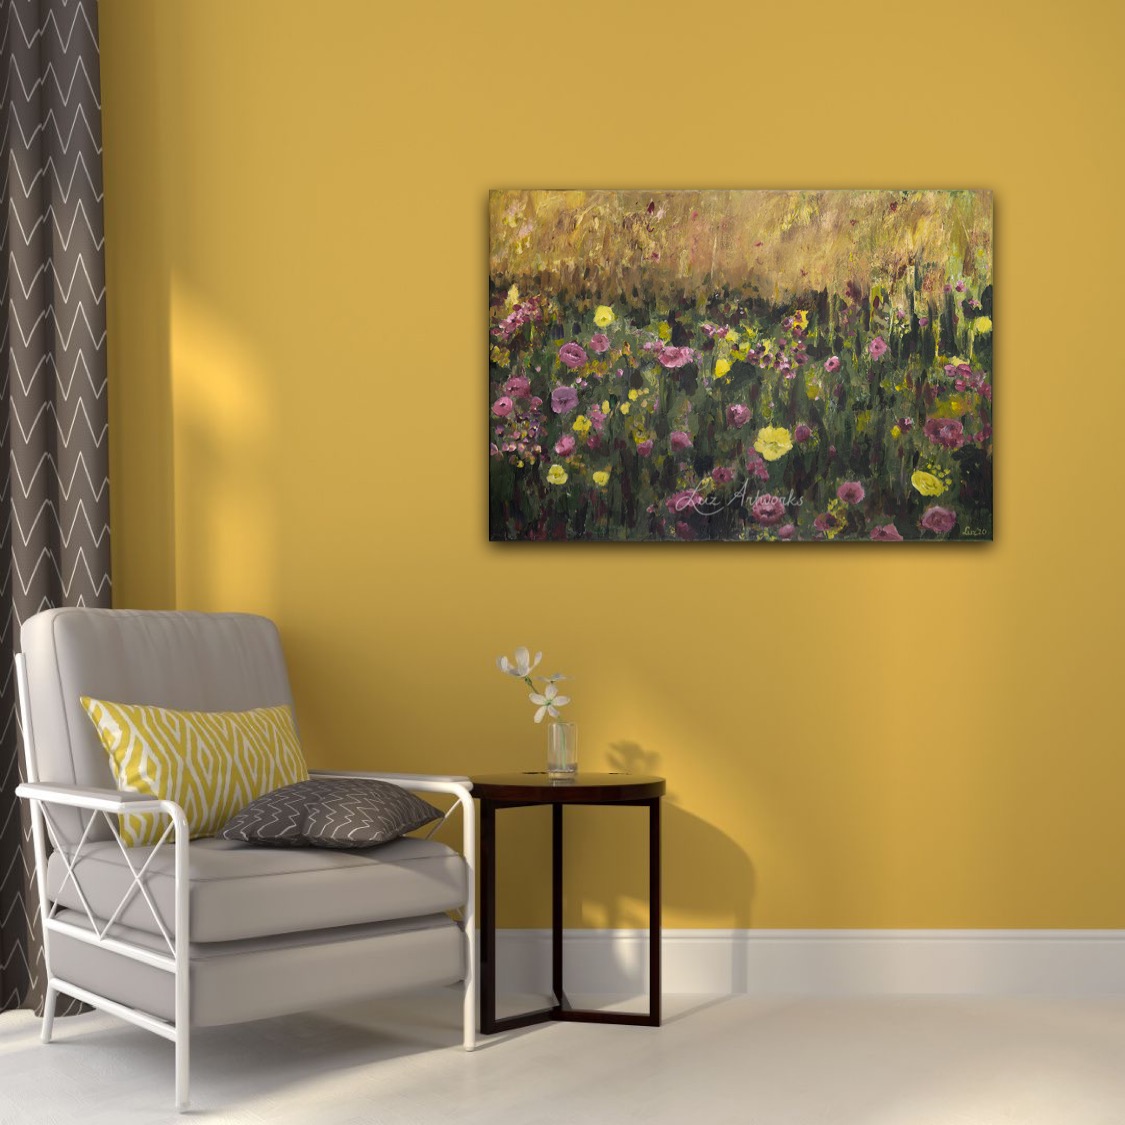 Pink and purple flower field by Luz Artworks Marloes Bloedjes - on the wall